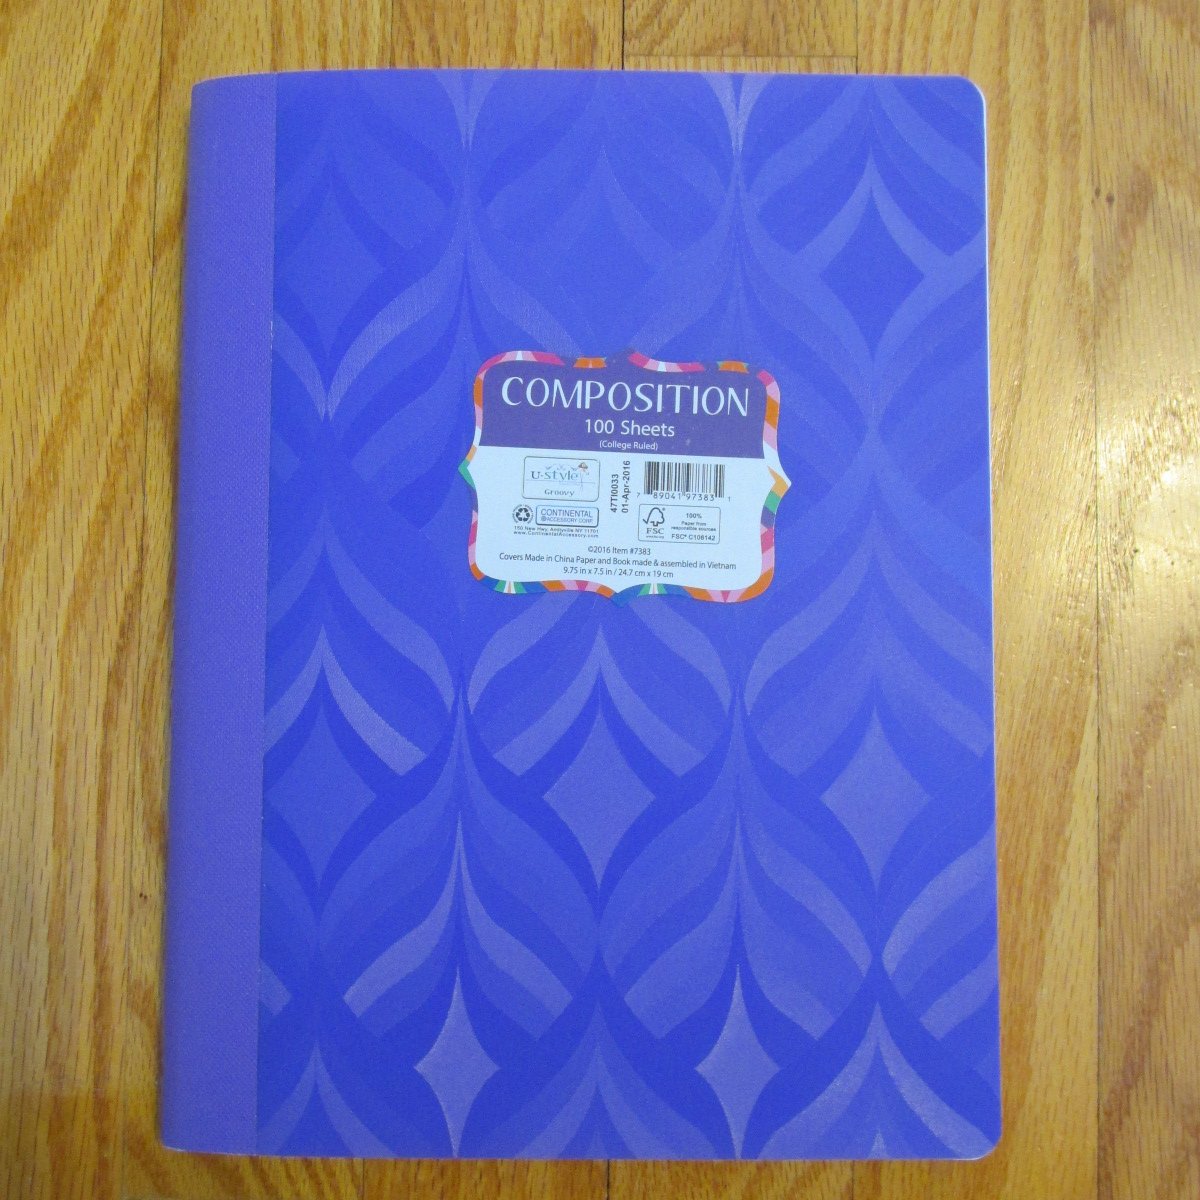 U STYLE COMPOSITION NOTE BOOK COLLEGE RULED 100 SHEETS GROOVY PURPLE VINYL COVER NEW